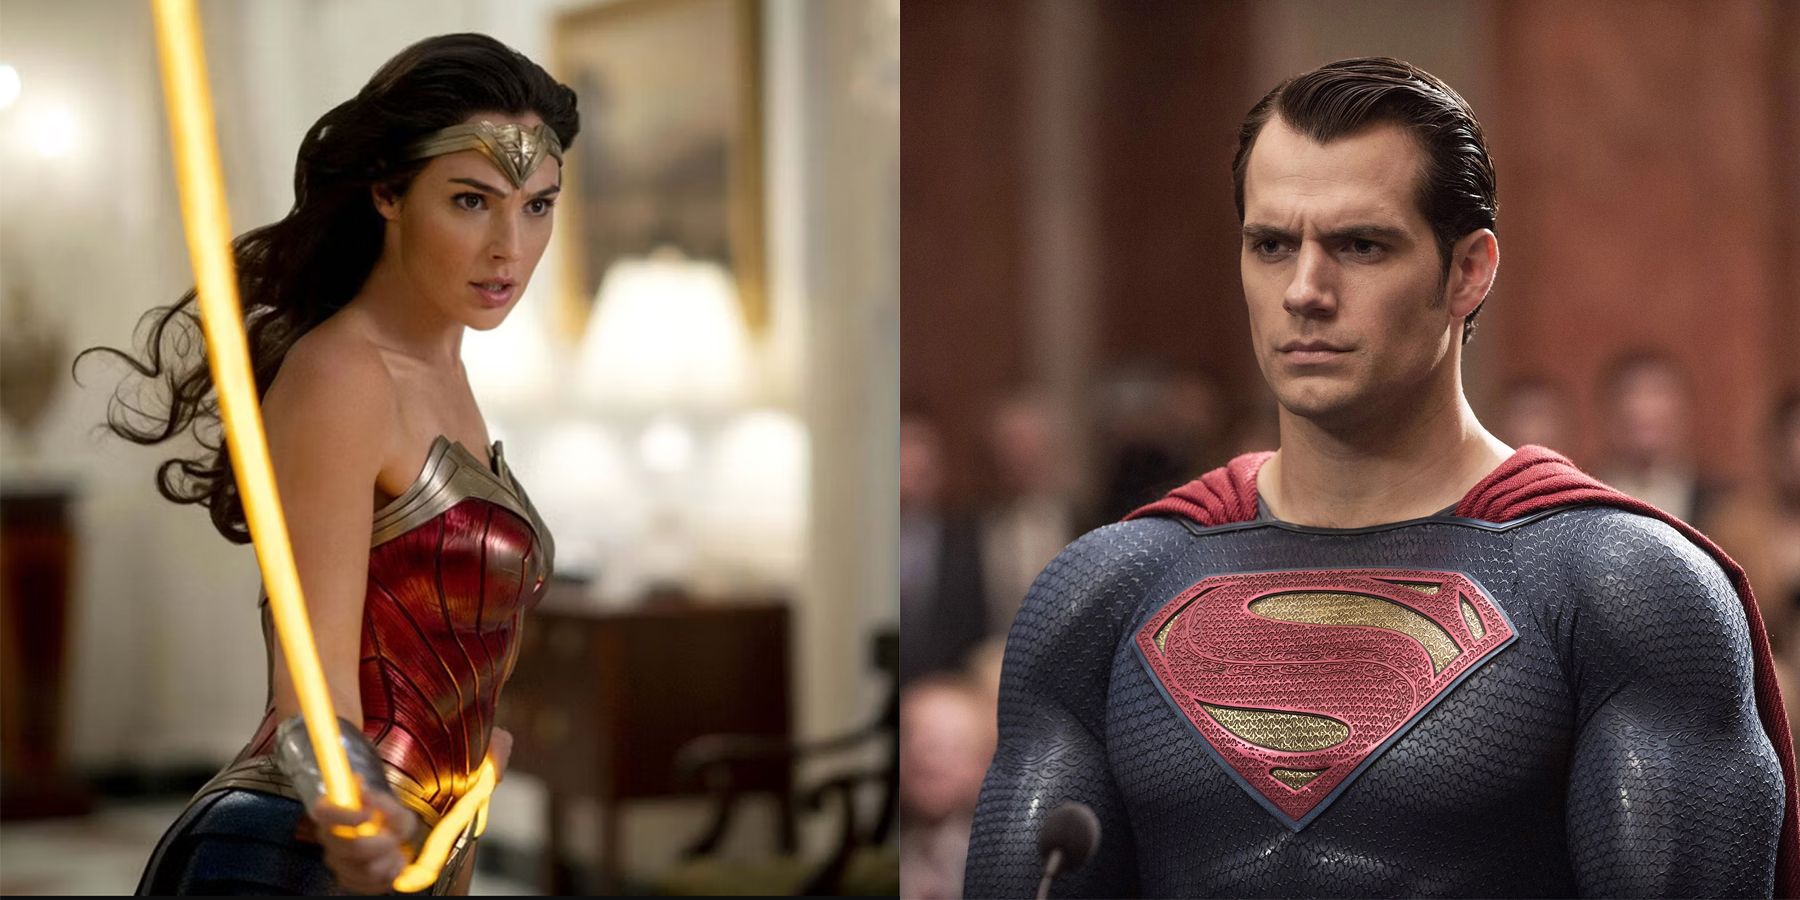 DCEU drops Henry Cavill from role of Superman